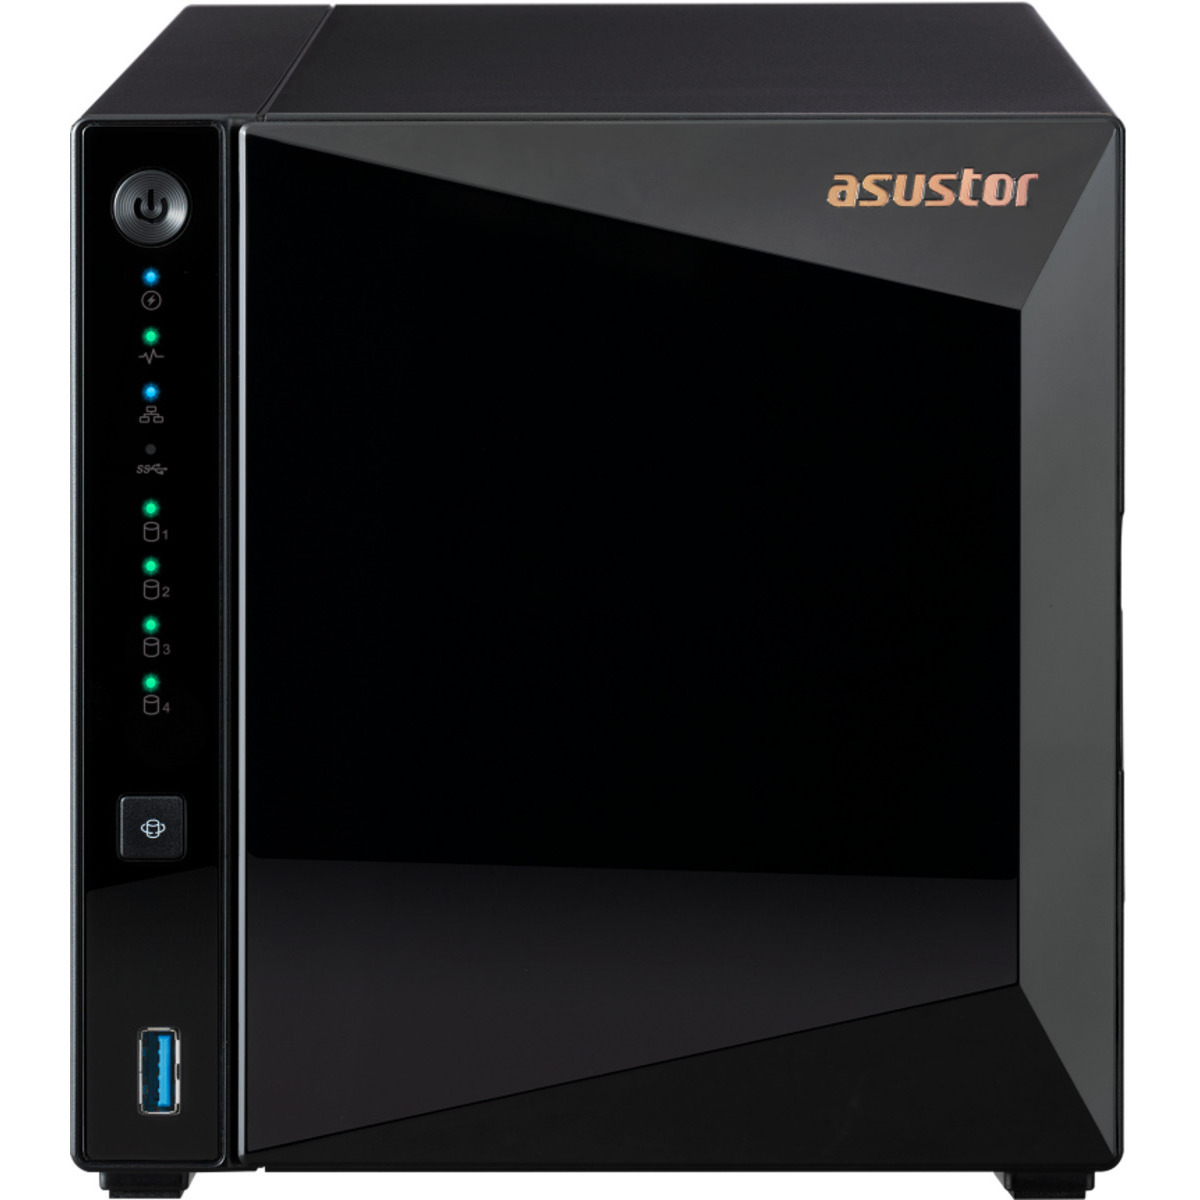 ASUSTOR DRIVESTOR 4 Pro Gen2 AS3304T v2 16tb 4-Bay Desktop Personal / Basic Home / Small Office NAS - Network Attached Storage Device 4x4tb Samsung 870 EVO MZ-77E4T0BAM 2.5 560/530MB/s SATA 6Gb/s SSD CONSUMER Class Drives Installed - Burn-In Tested - ON SALE DRIVESTOR 4 Pro Gen2 AS3304T v2